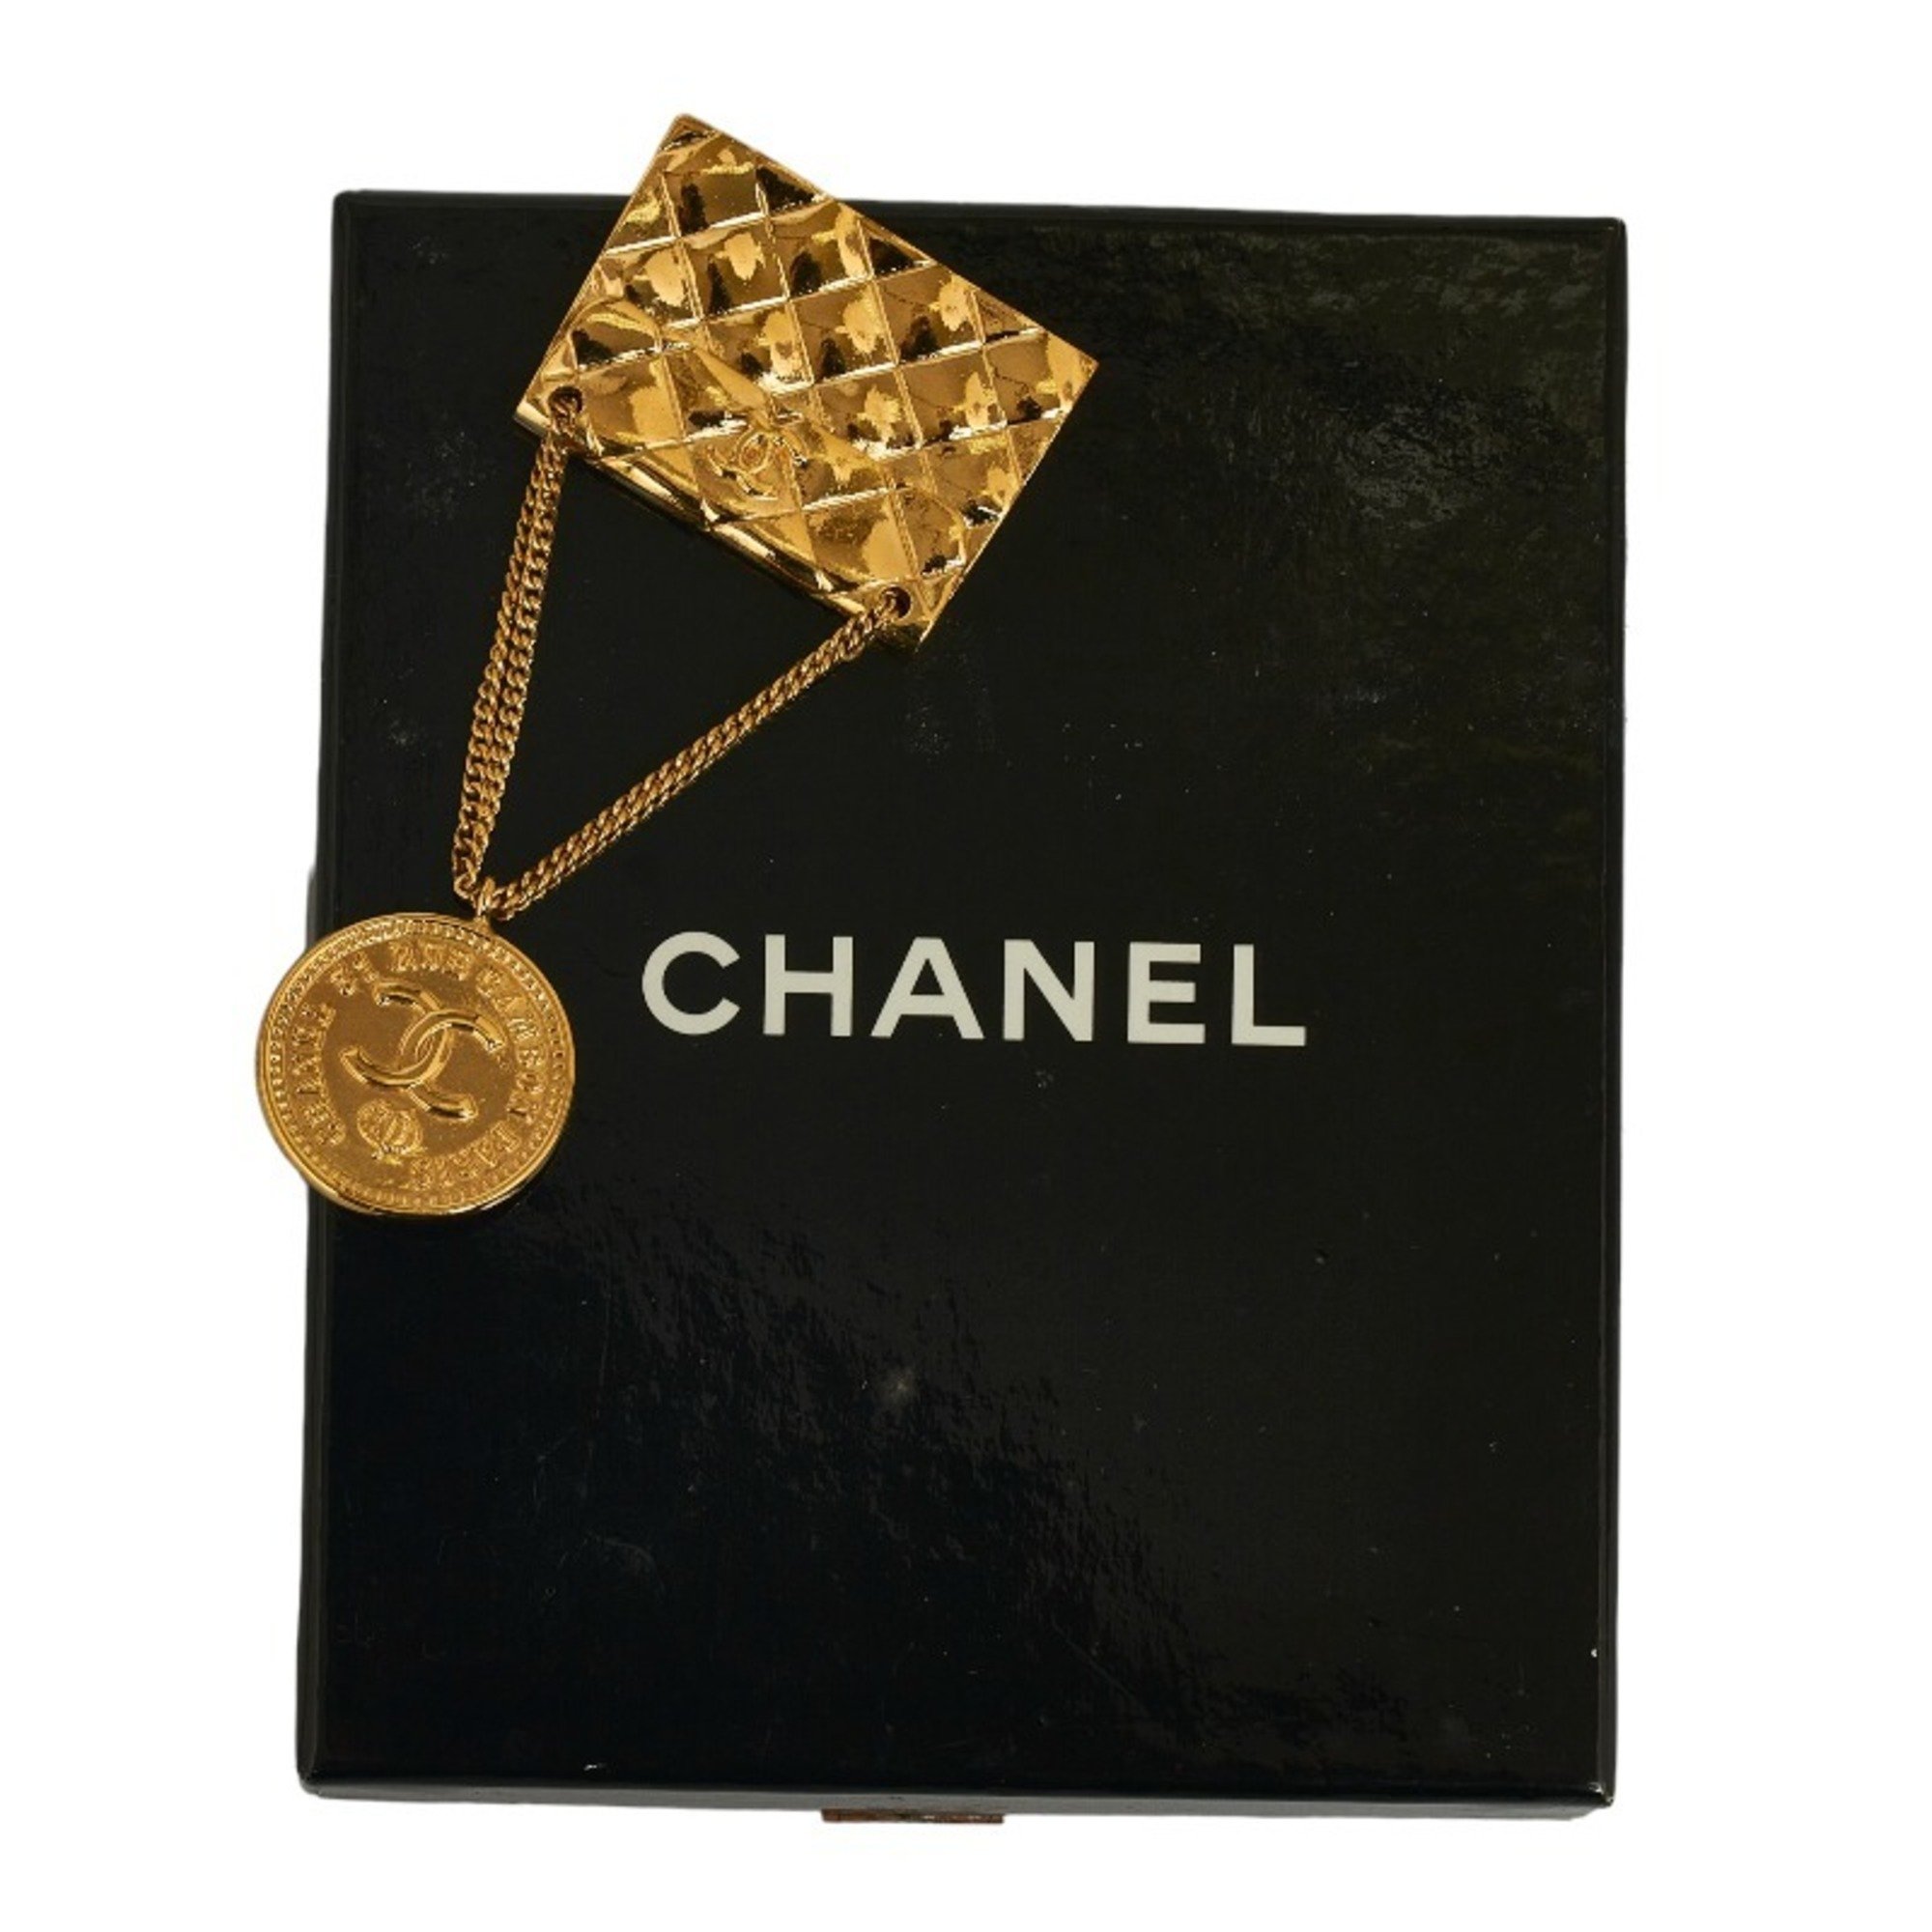 CHANEL Coco Swing Matelasse Bag Mark Brooch Gold Plated Women's